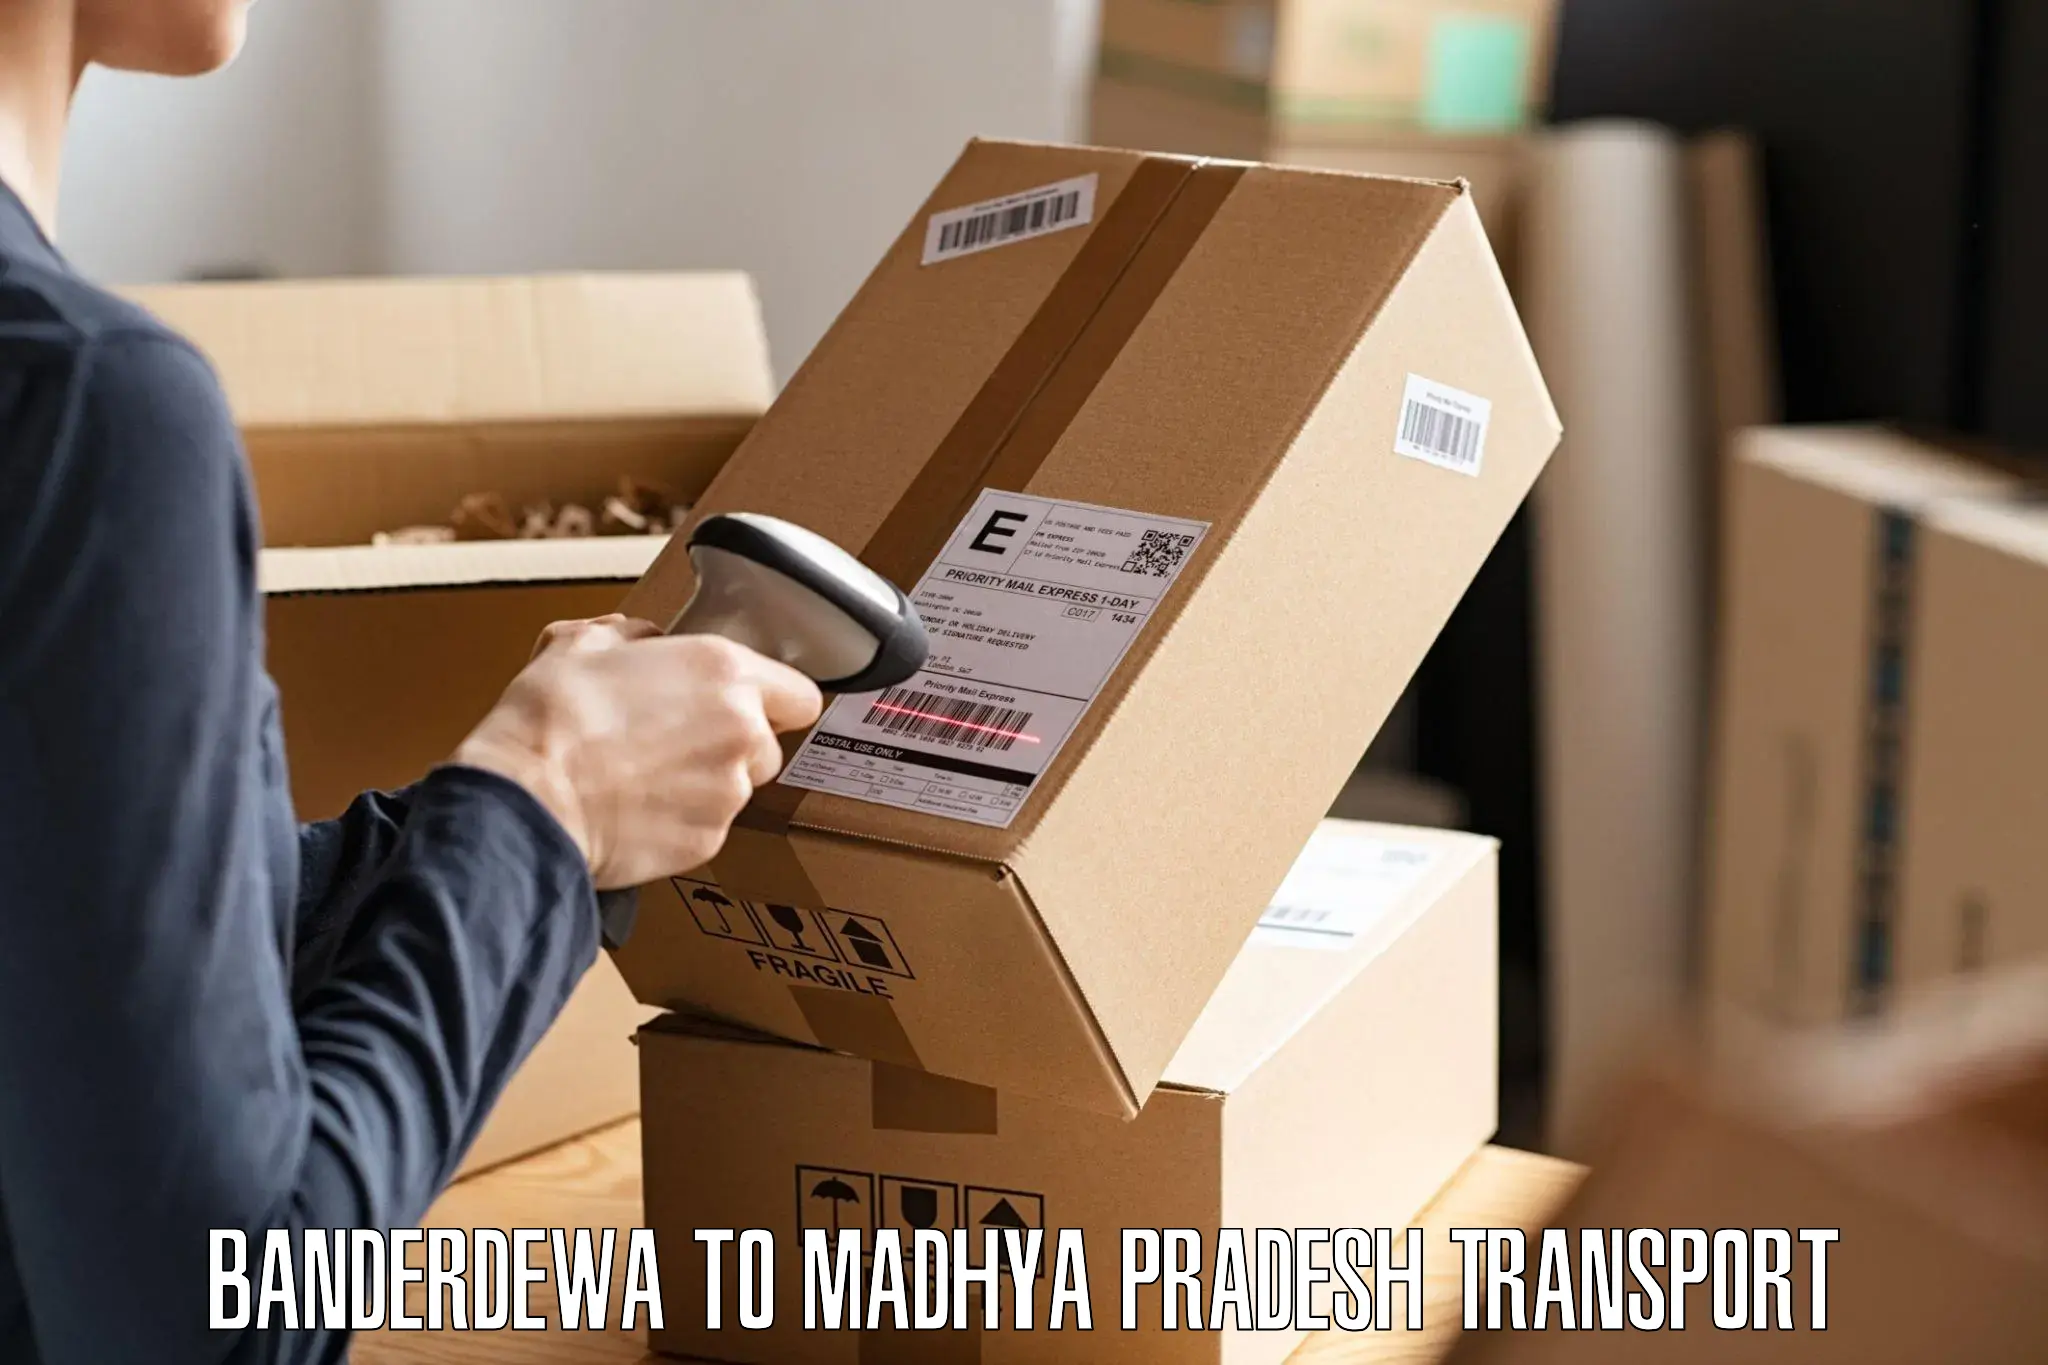 Container transport service in Banderdewa to Gotegaon